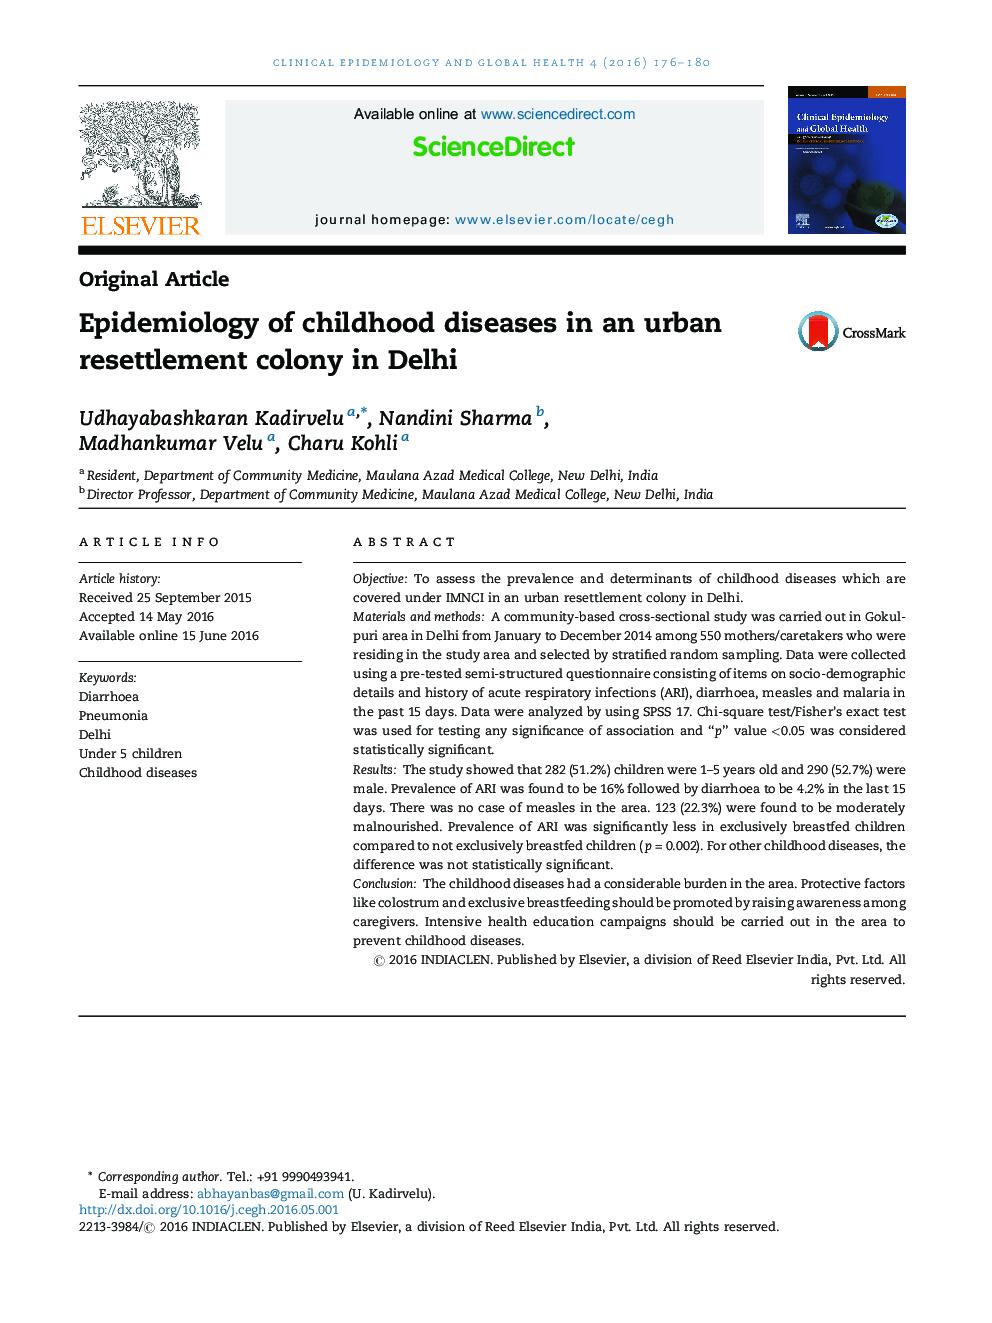 Epidemiology of childhood diseases in an urban resettlement colony in Delhi